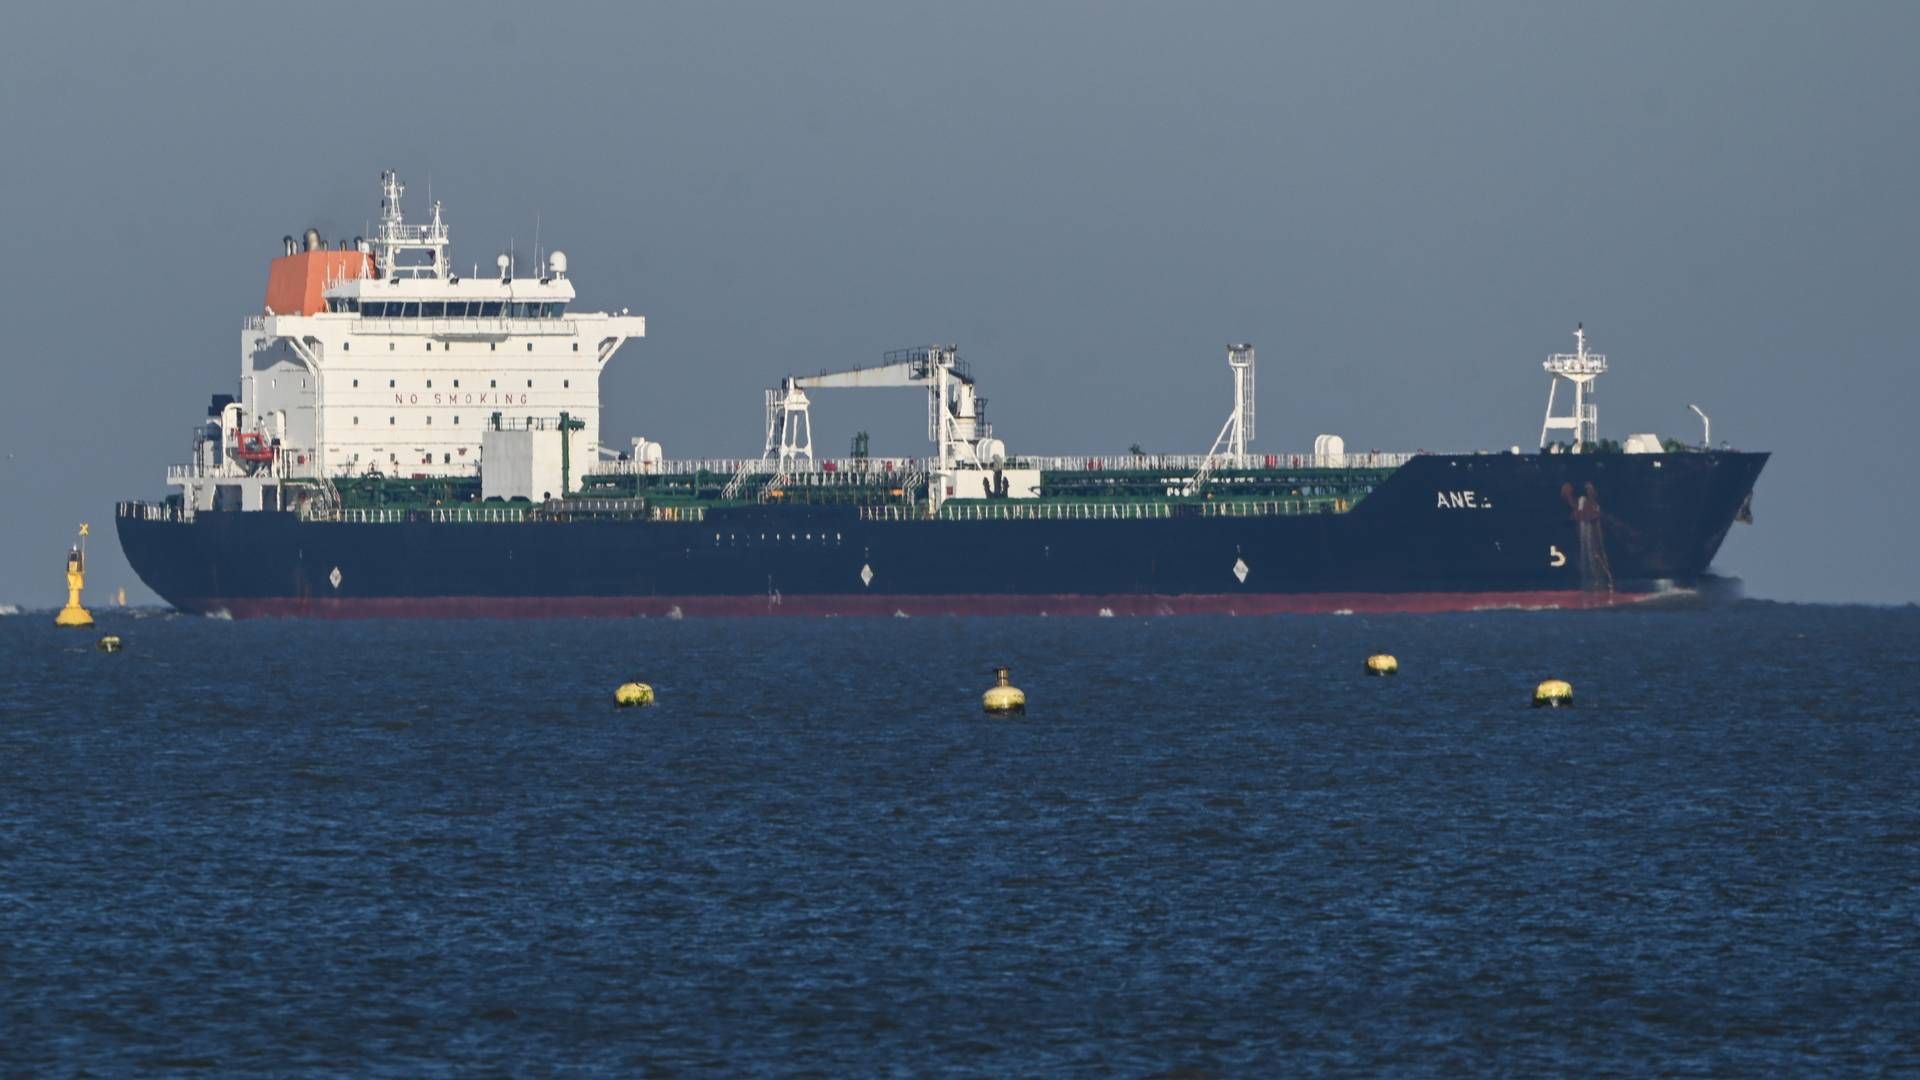 File photo. In June last year, the Norwegian media Dagens Næringsliv described how Fractal Marine was shipping oil worth billions of kroner from Russia's oil terminals and in a short time has become the second largest player in the so-called shadow fleet. | Photo: Lars Klemmer/AP/Ritzau Scanpix